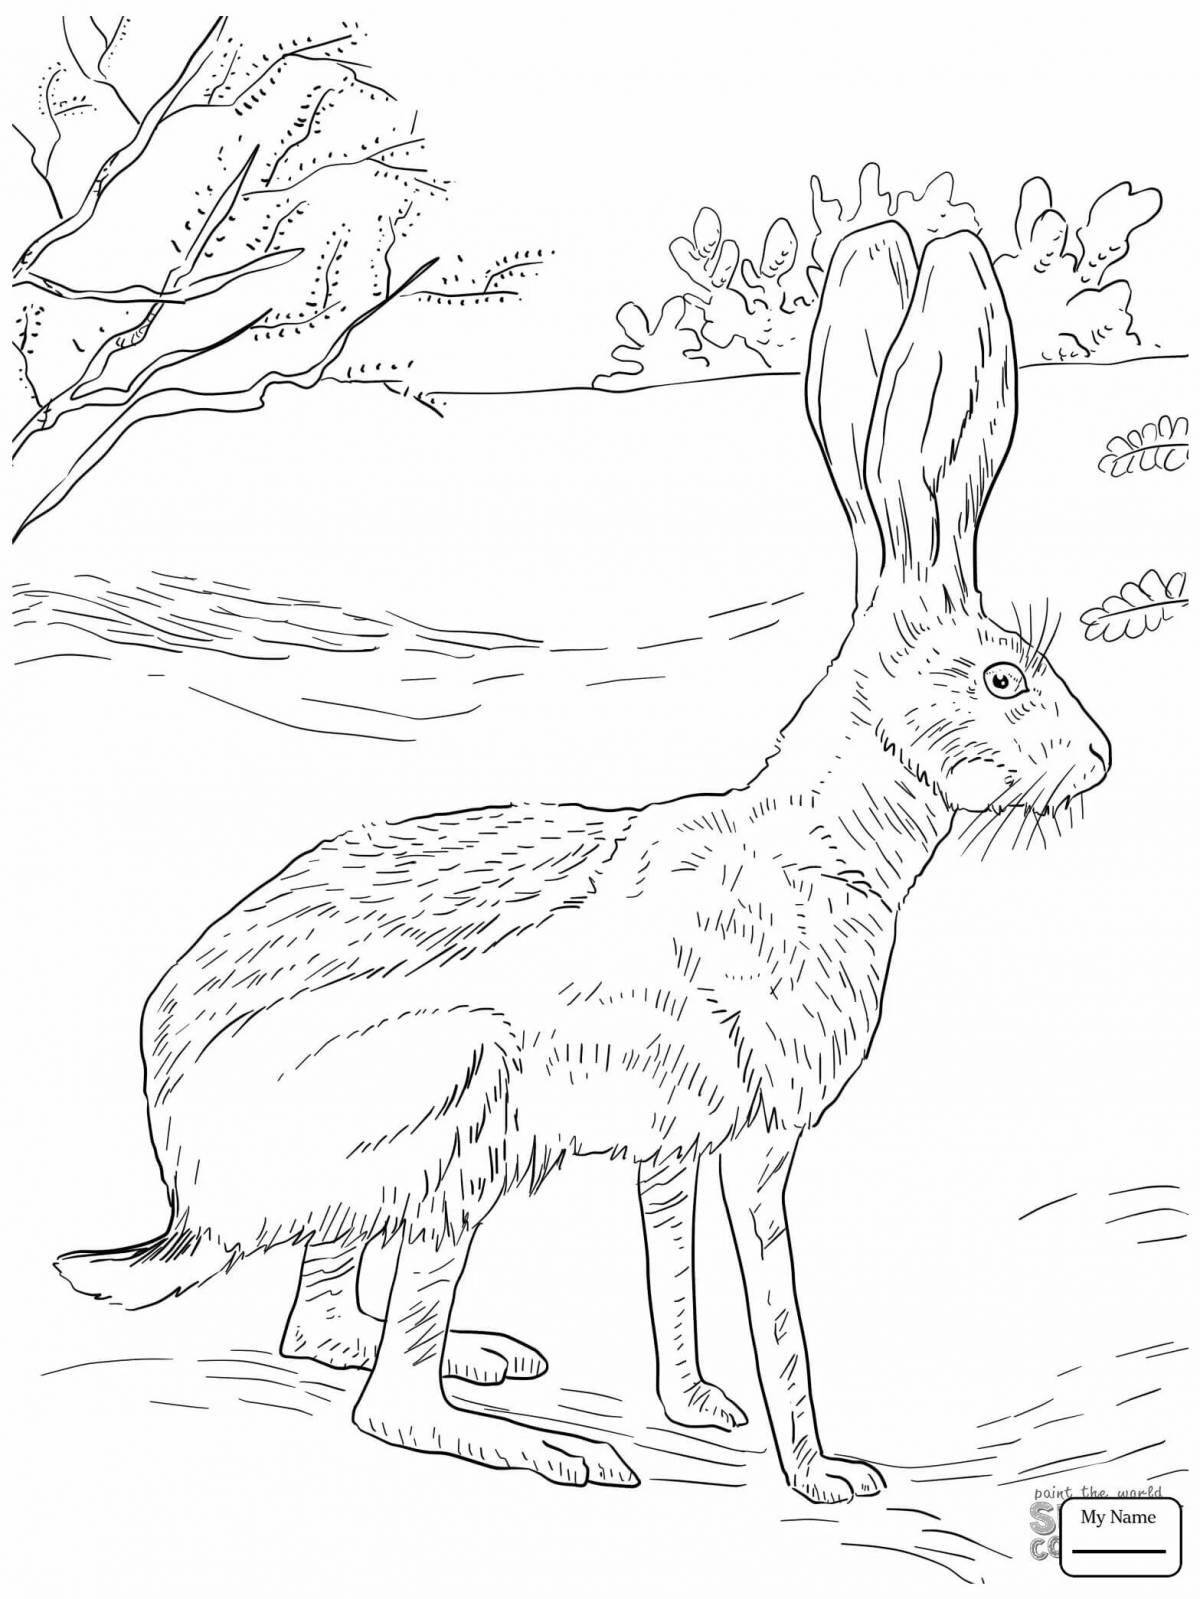 Fancy hare in the forest